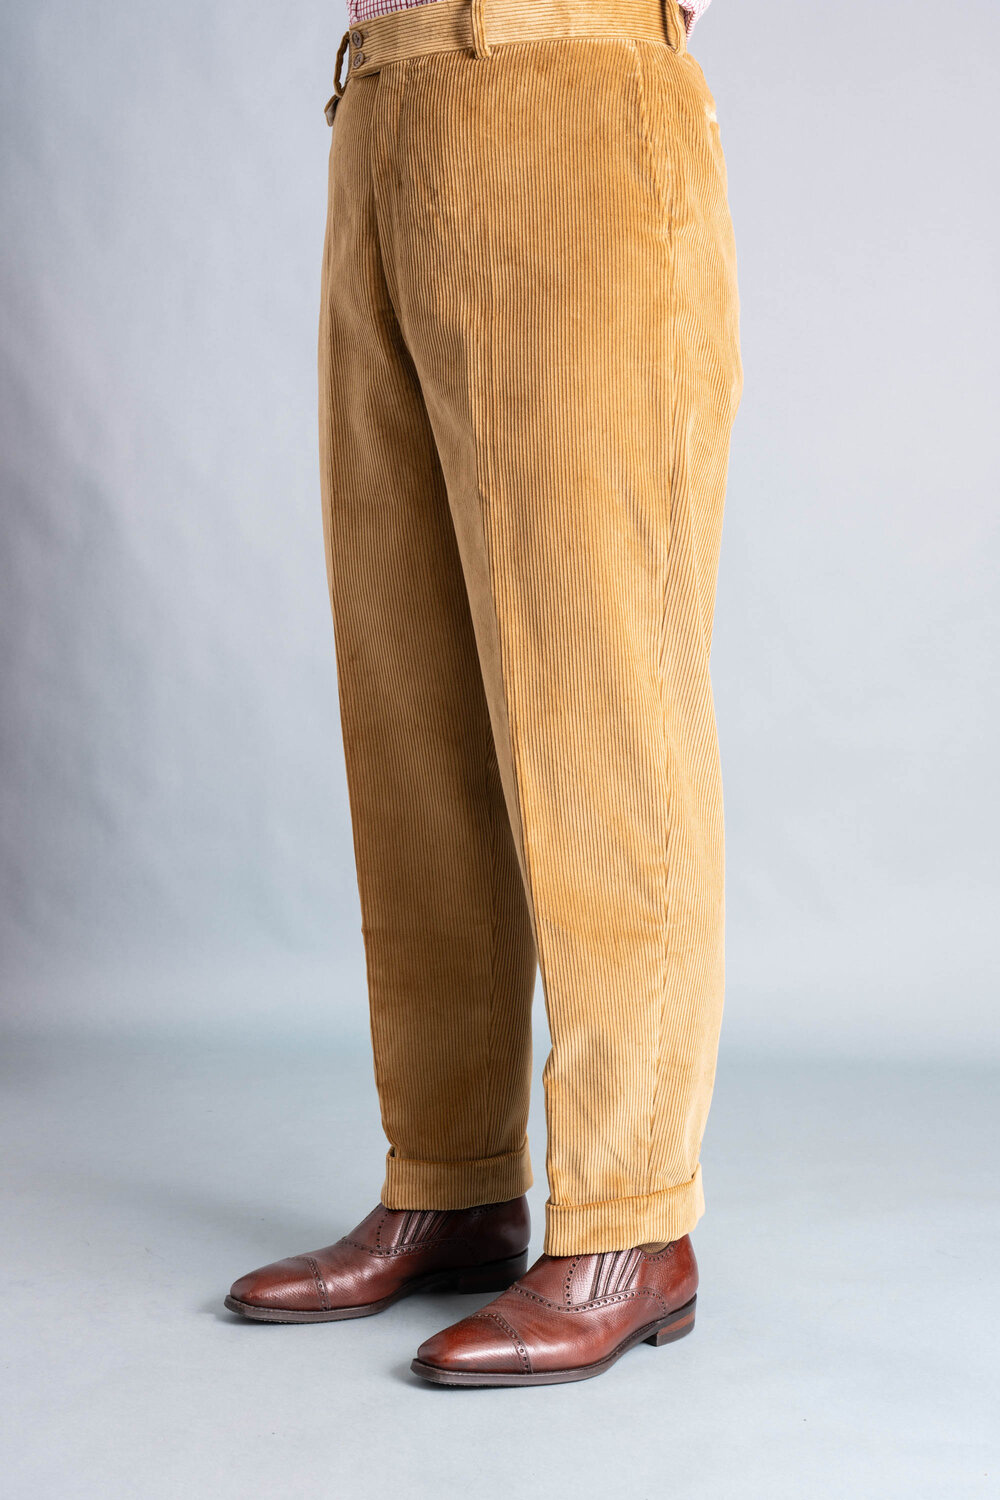 Men's Trousers: Chinos, Corduroy Trousers & More | Joseph Turner